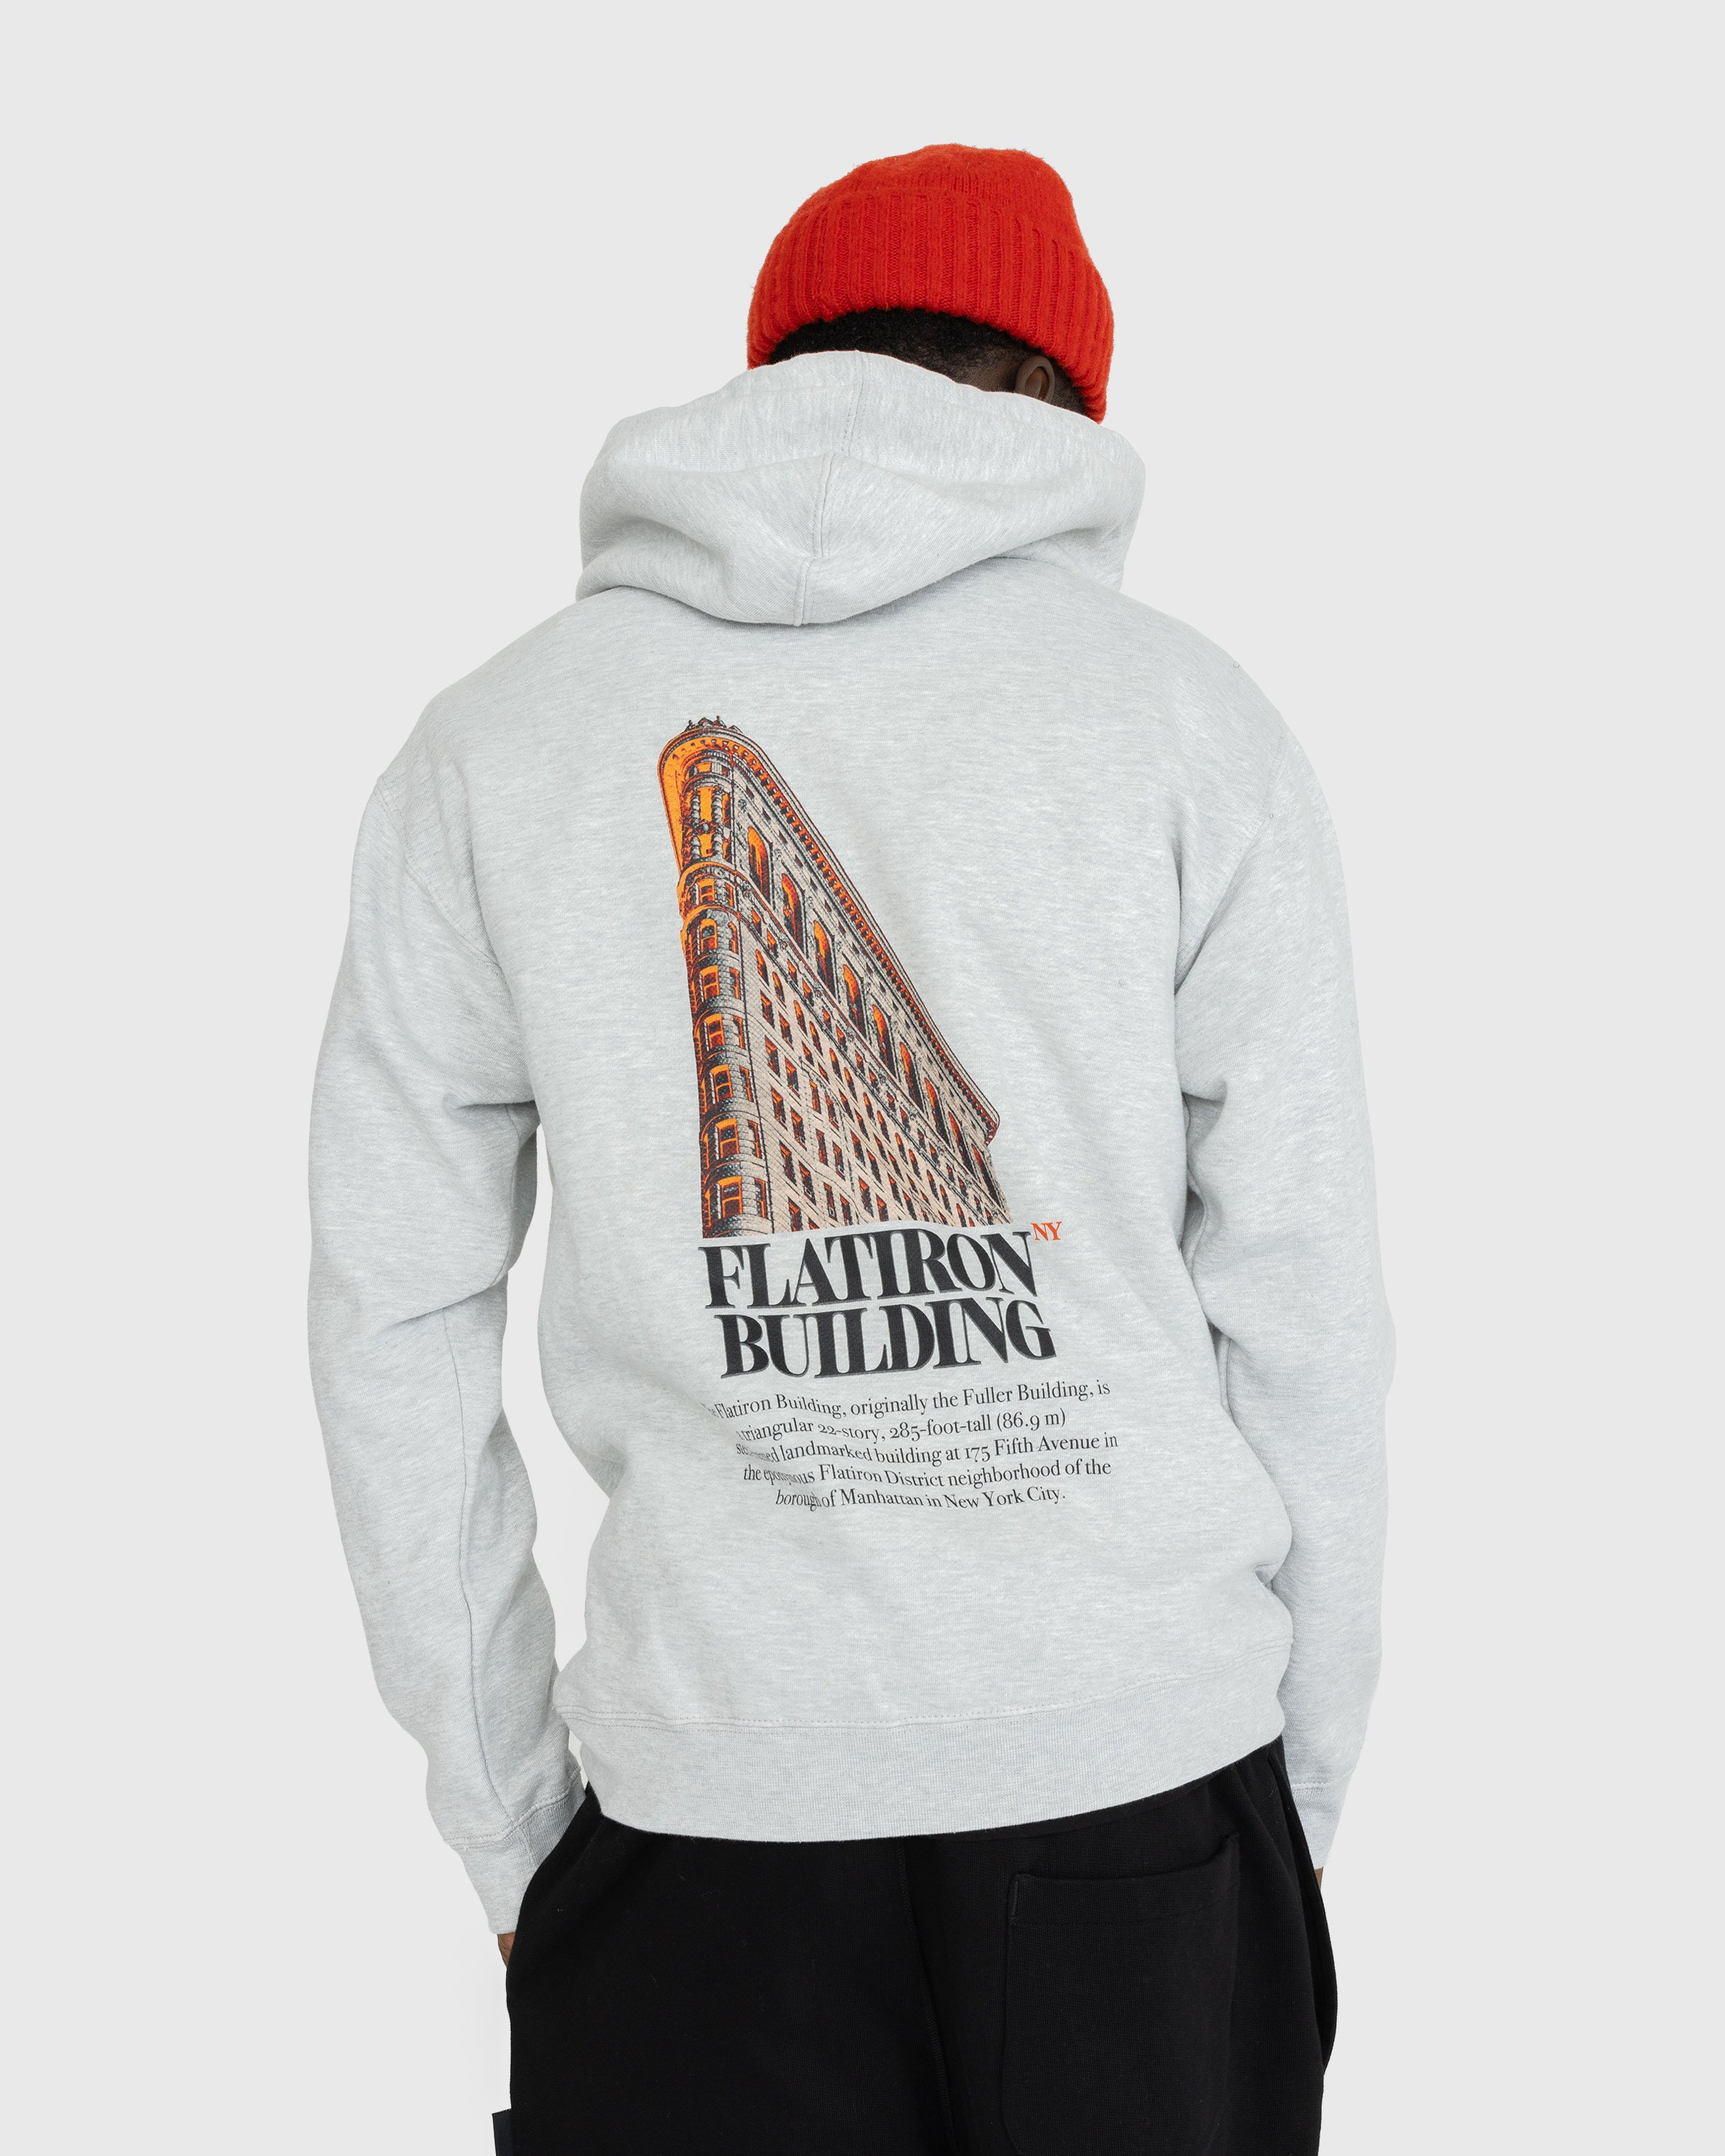 At The Moment x Highsnobiety - Flatiron Building Hoodie - Clothing - Grey - Image 3